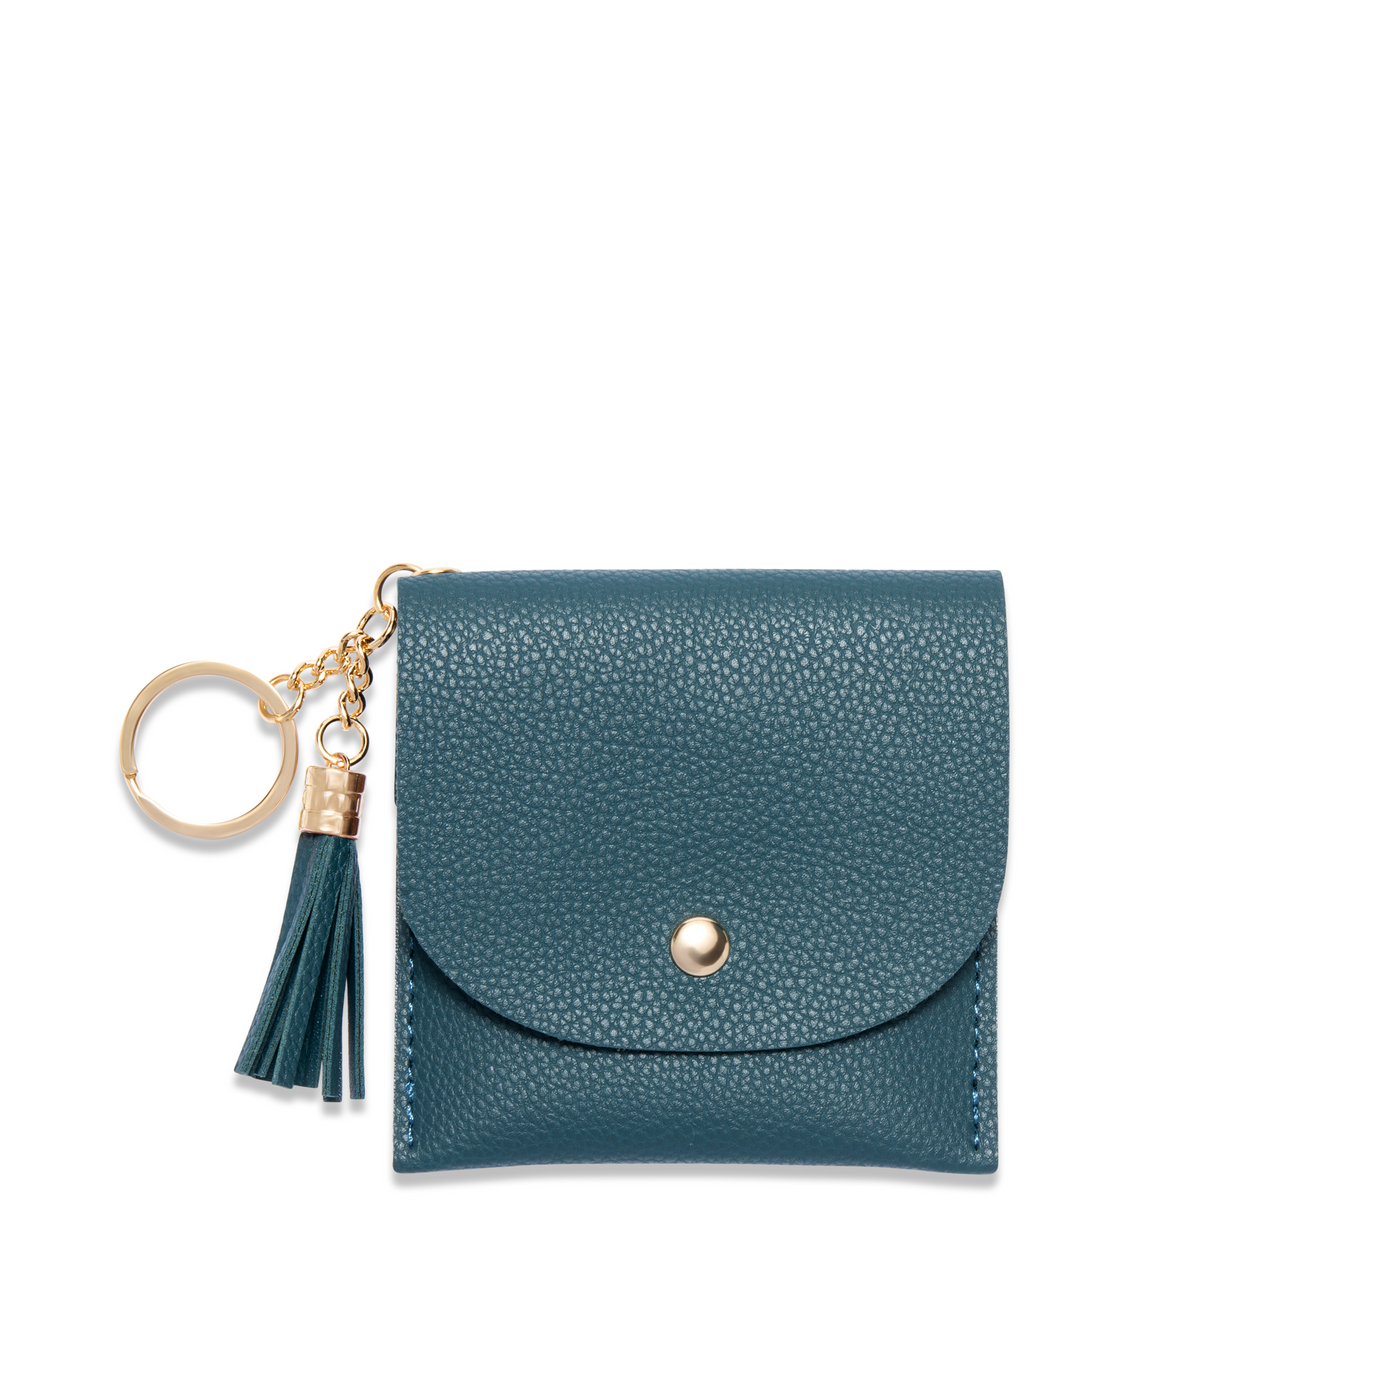 Lark and Ives / Vegan Leather Accessories / Small Accessories / Wallet / Mini Wallet / Card Case / Card Holder / Button snap closure / Flap Wallet / Card Purse with Gold Button and Keyring / Blue